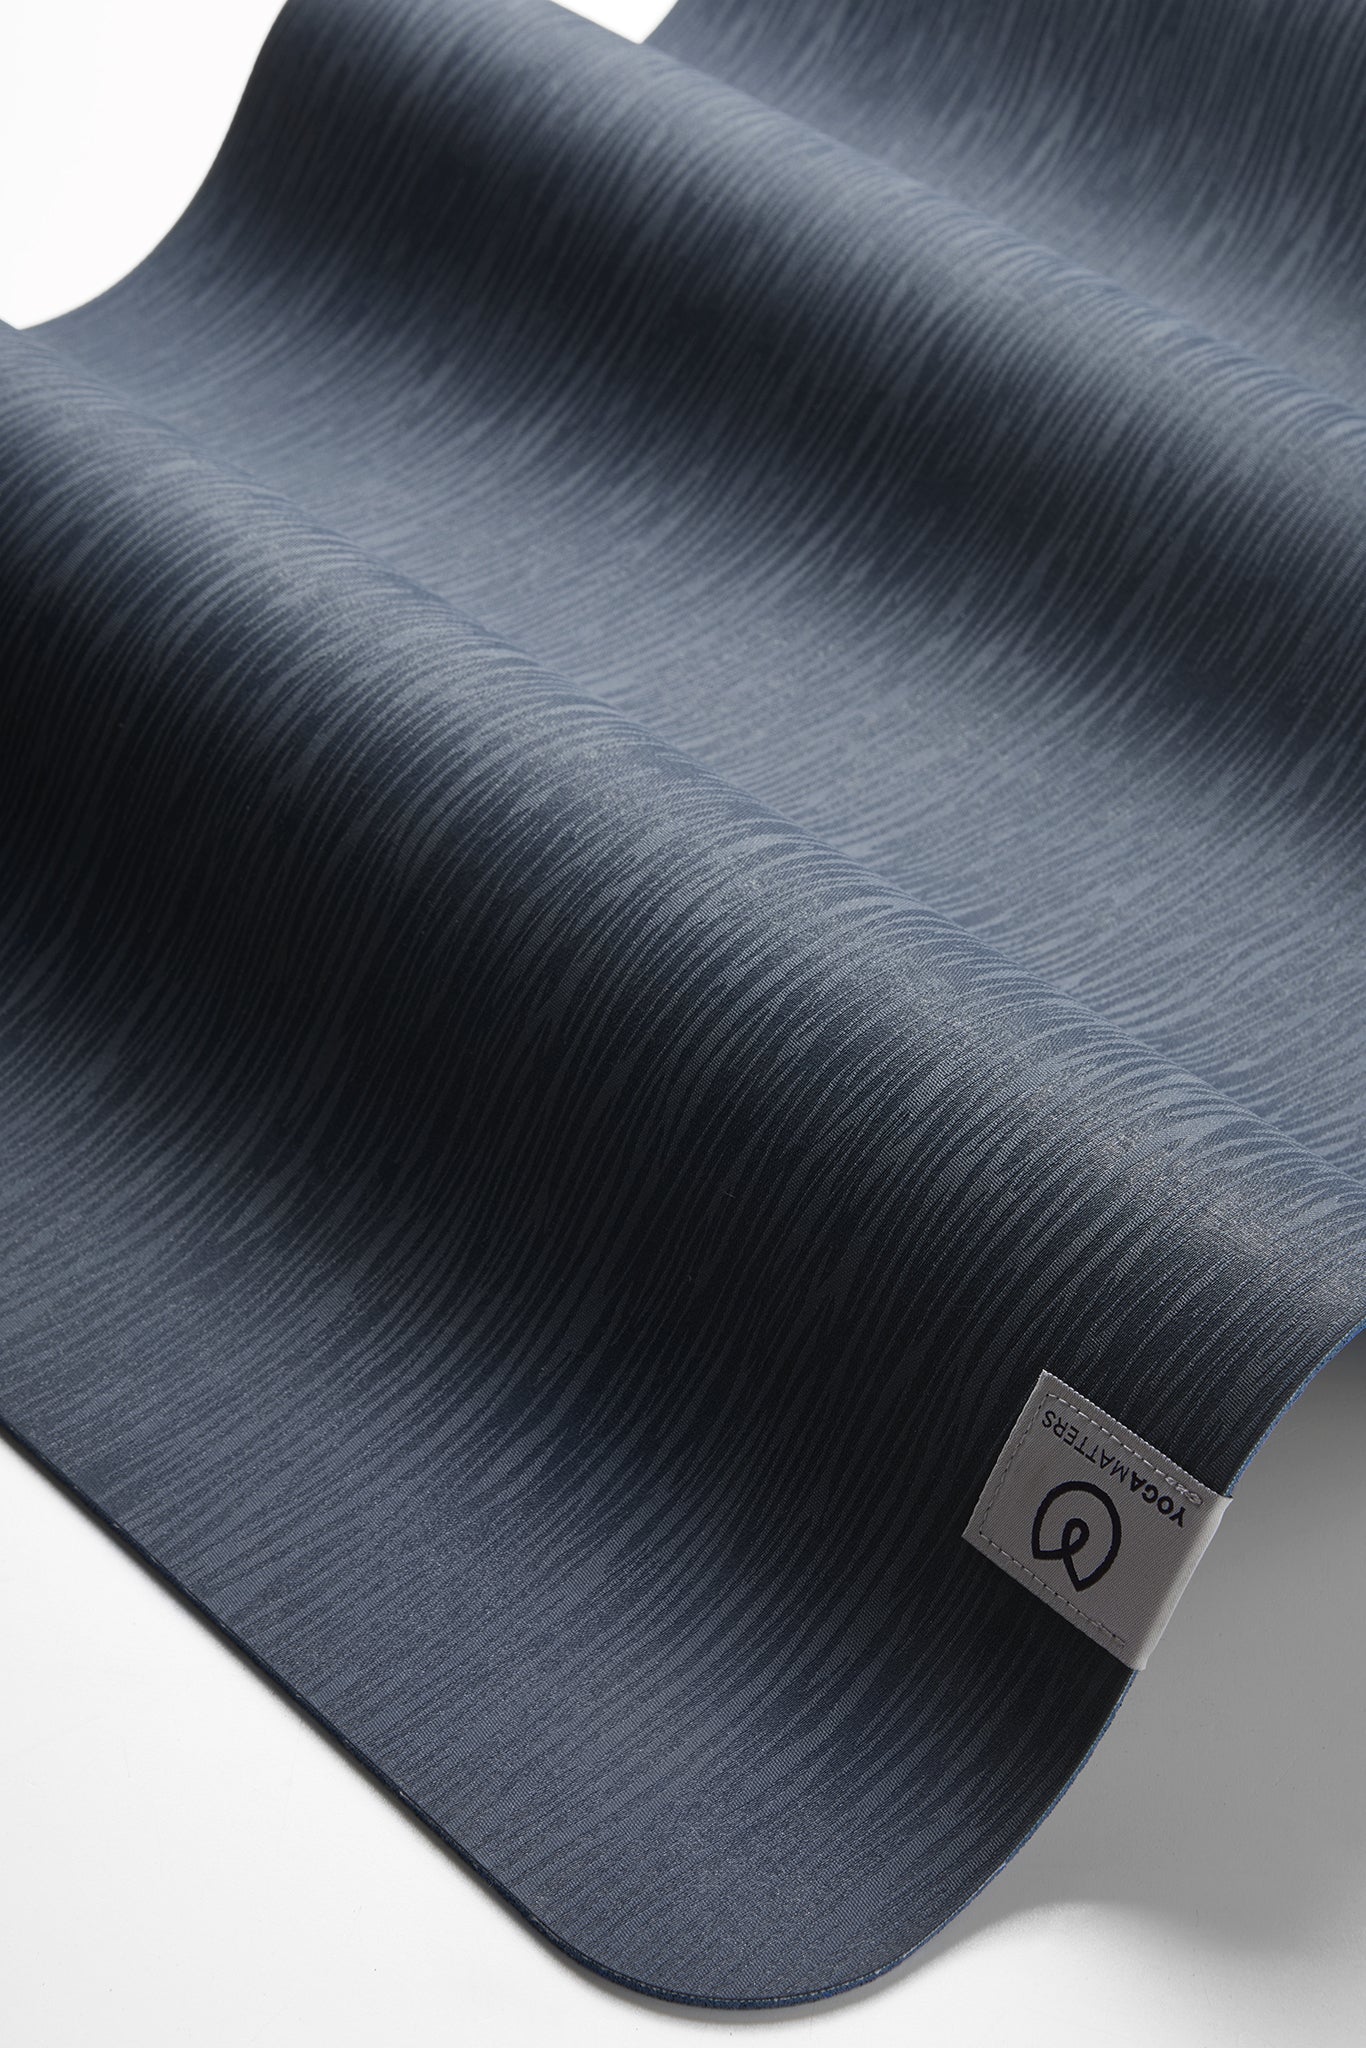 Lululemon yoga mat in navy blue, close-up side view, textured non-slip surface, rolled halfway for product detail display